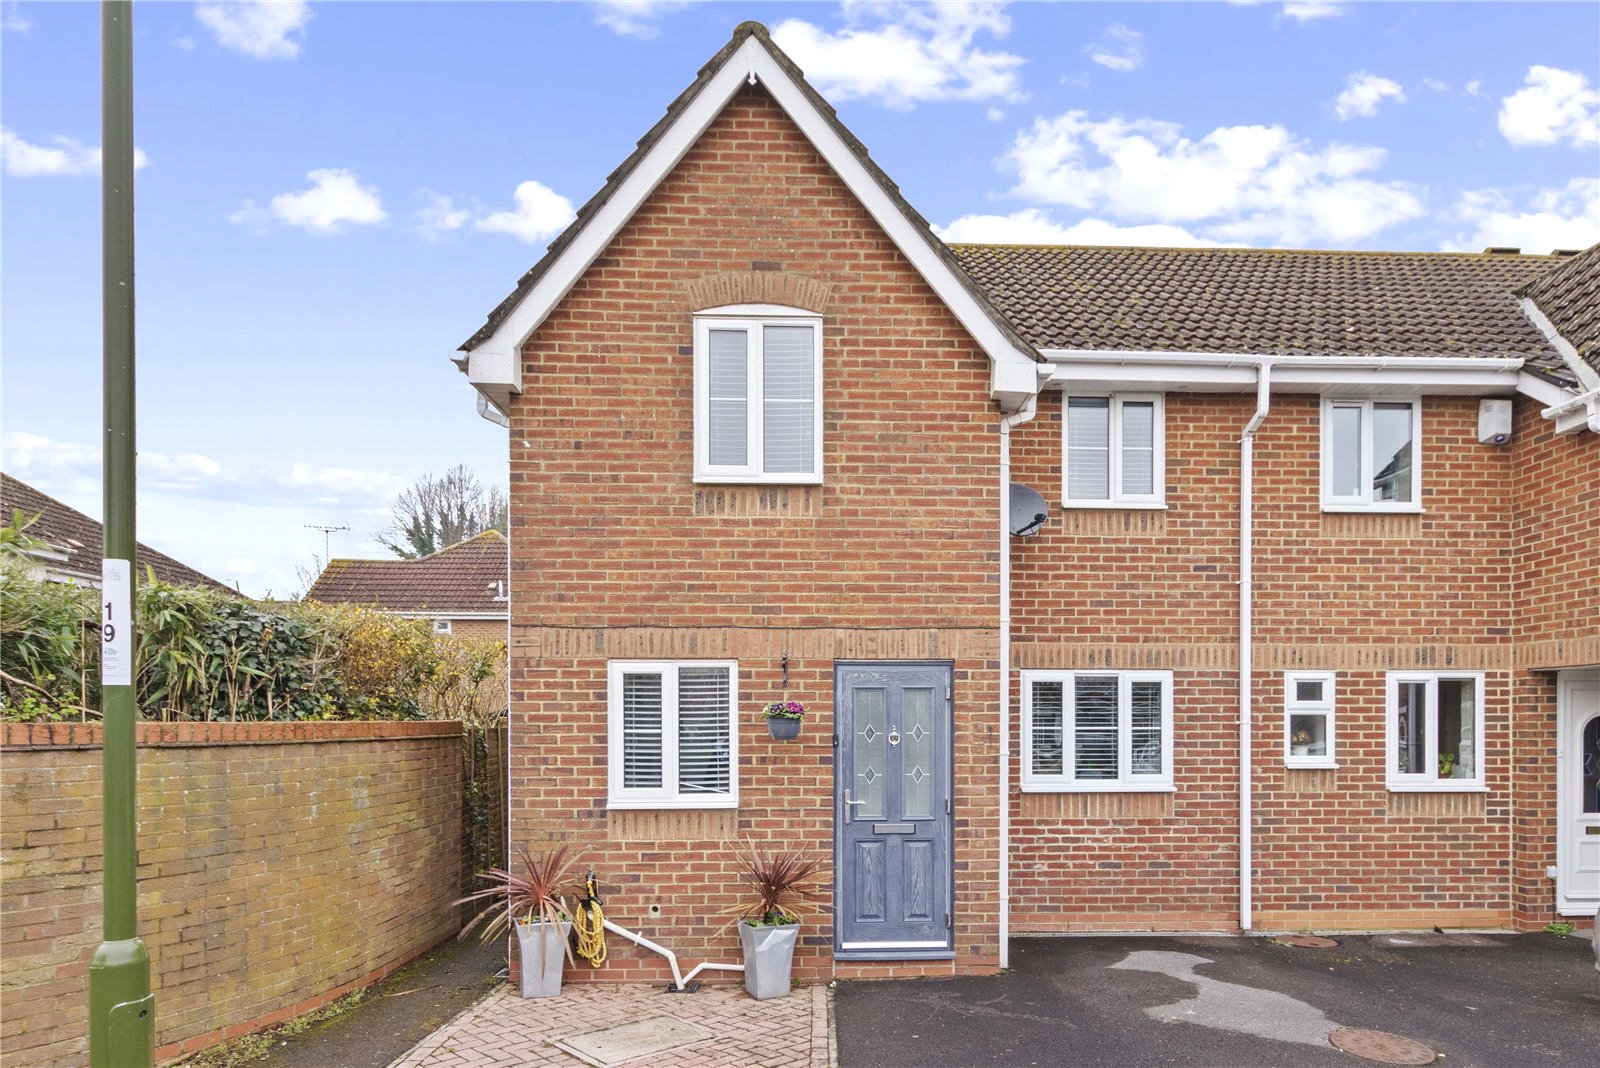 3 bed house for sale in Churchwood Drive, Tangmere - Property Image 1